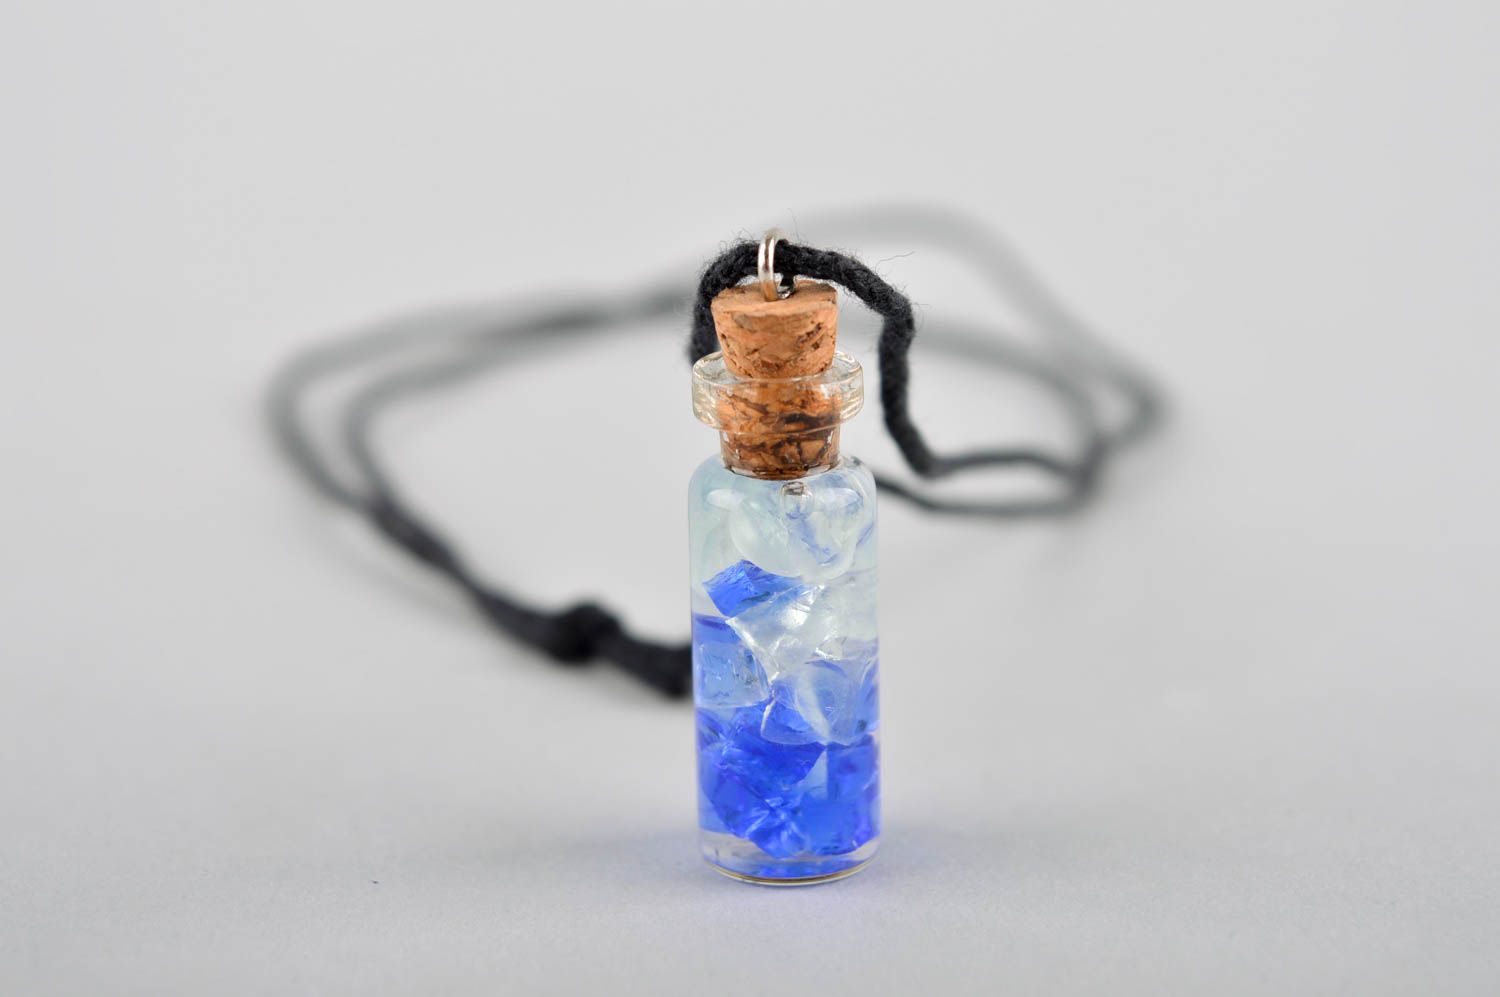 Homemade jewelry fashion necklace glass vial charm designer accessories photo 4